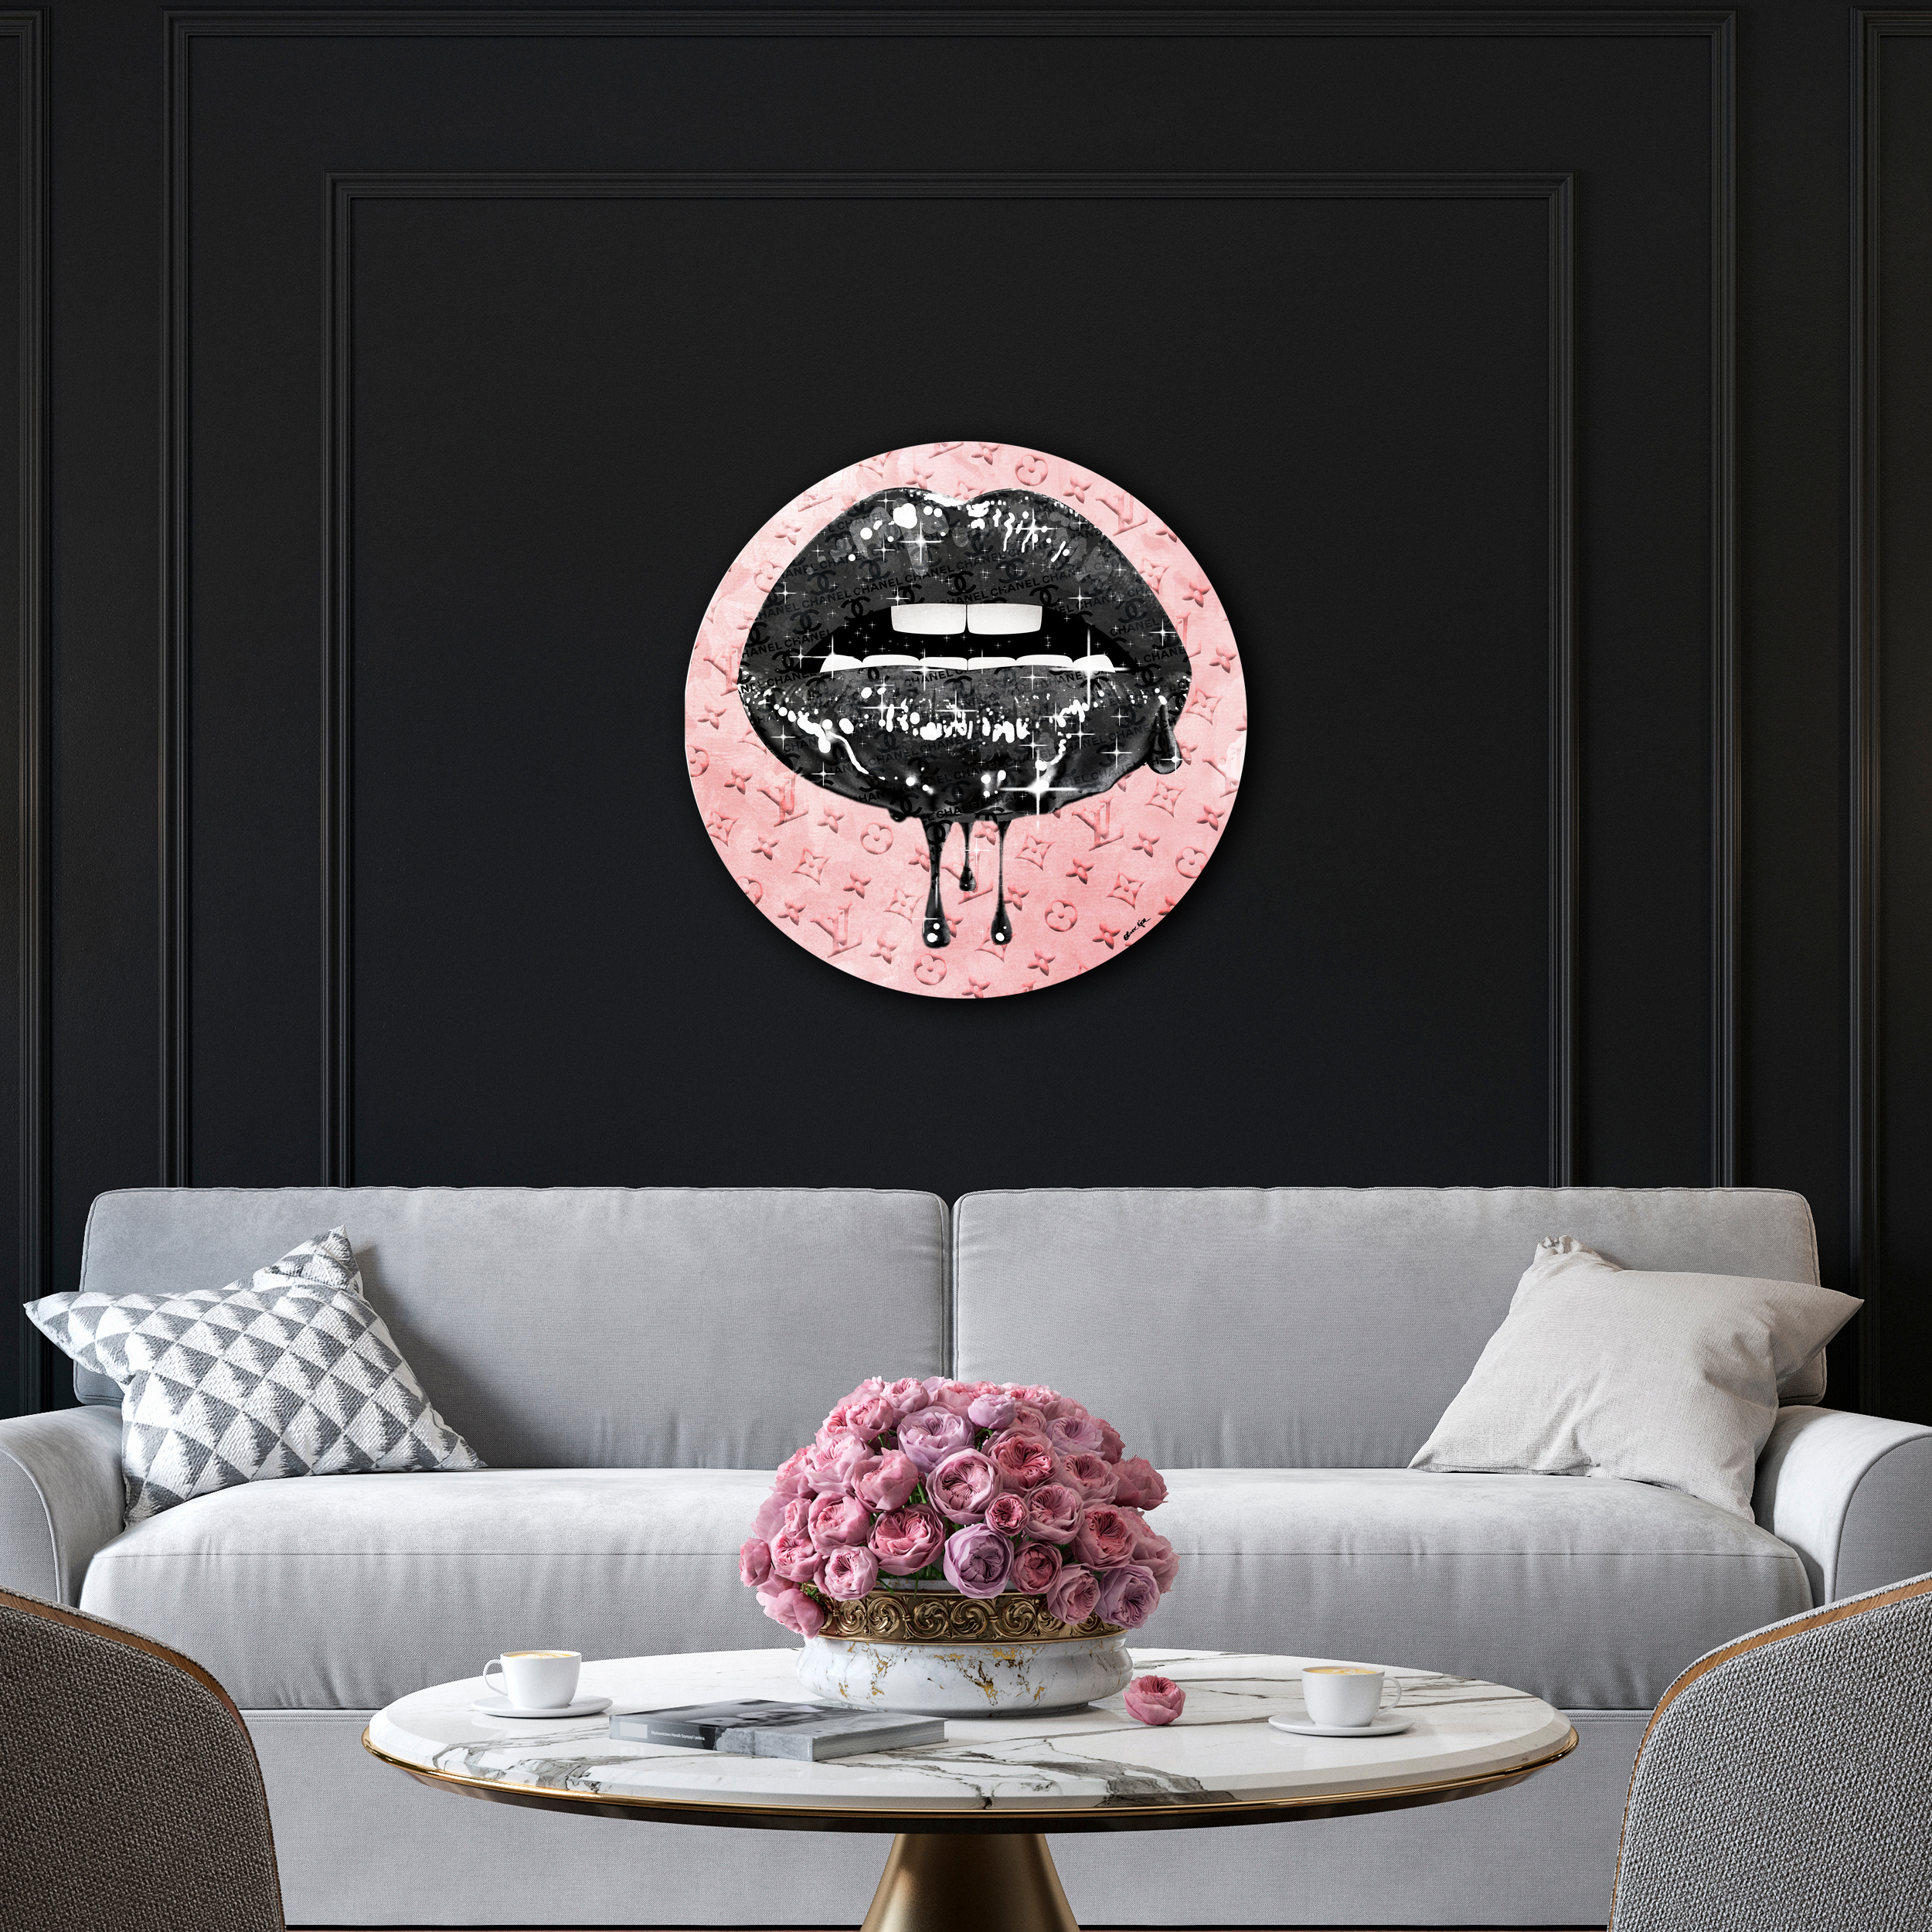 Fashion and Glam Noir and Blush Lips - Graphic Art Print Willa Arlo Interiors Format: Black Framed Canvas, Size: 40 H x 40 W x 2 D